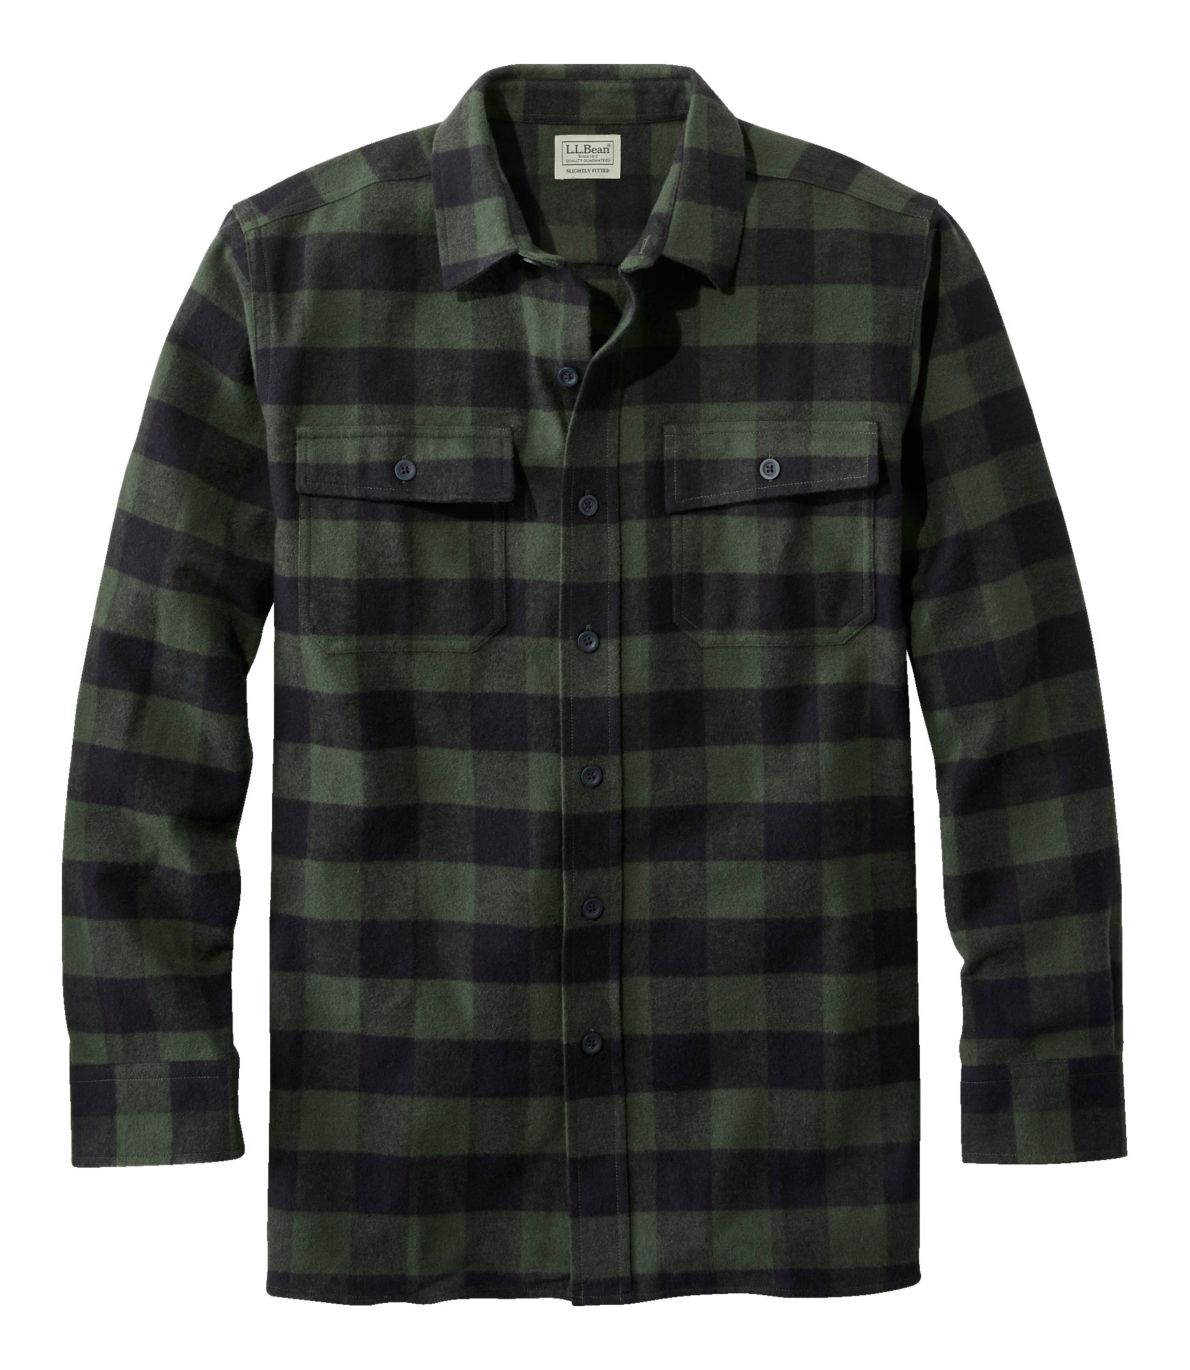 Men's Chamois Shirt, Slightly Fitted, Plaid